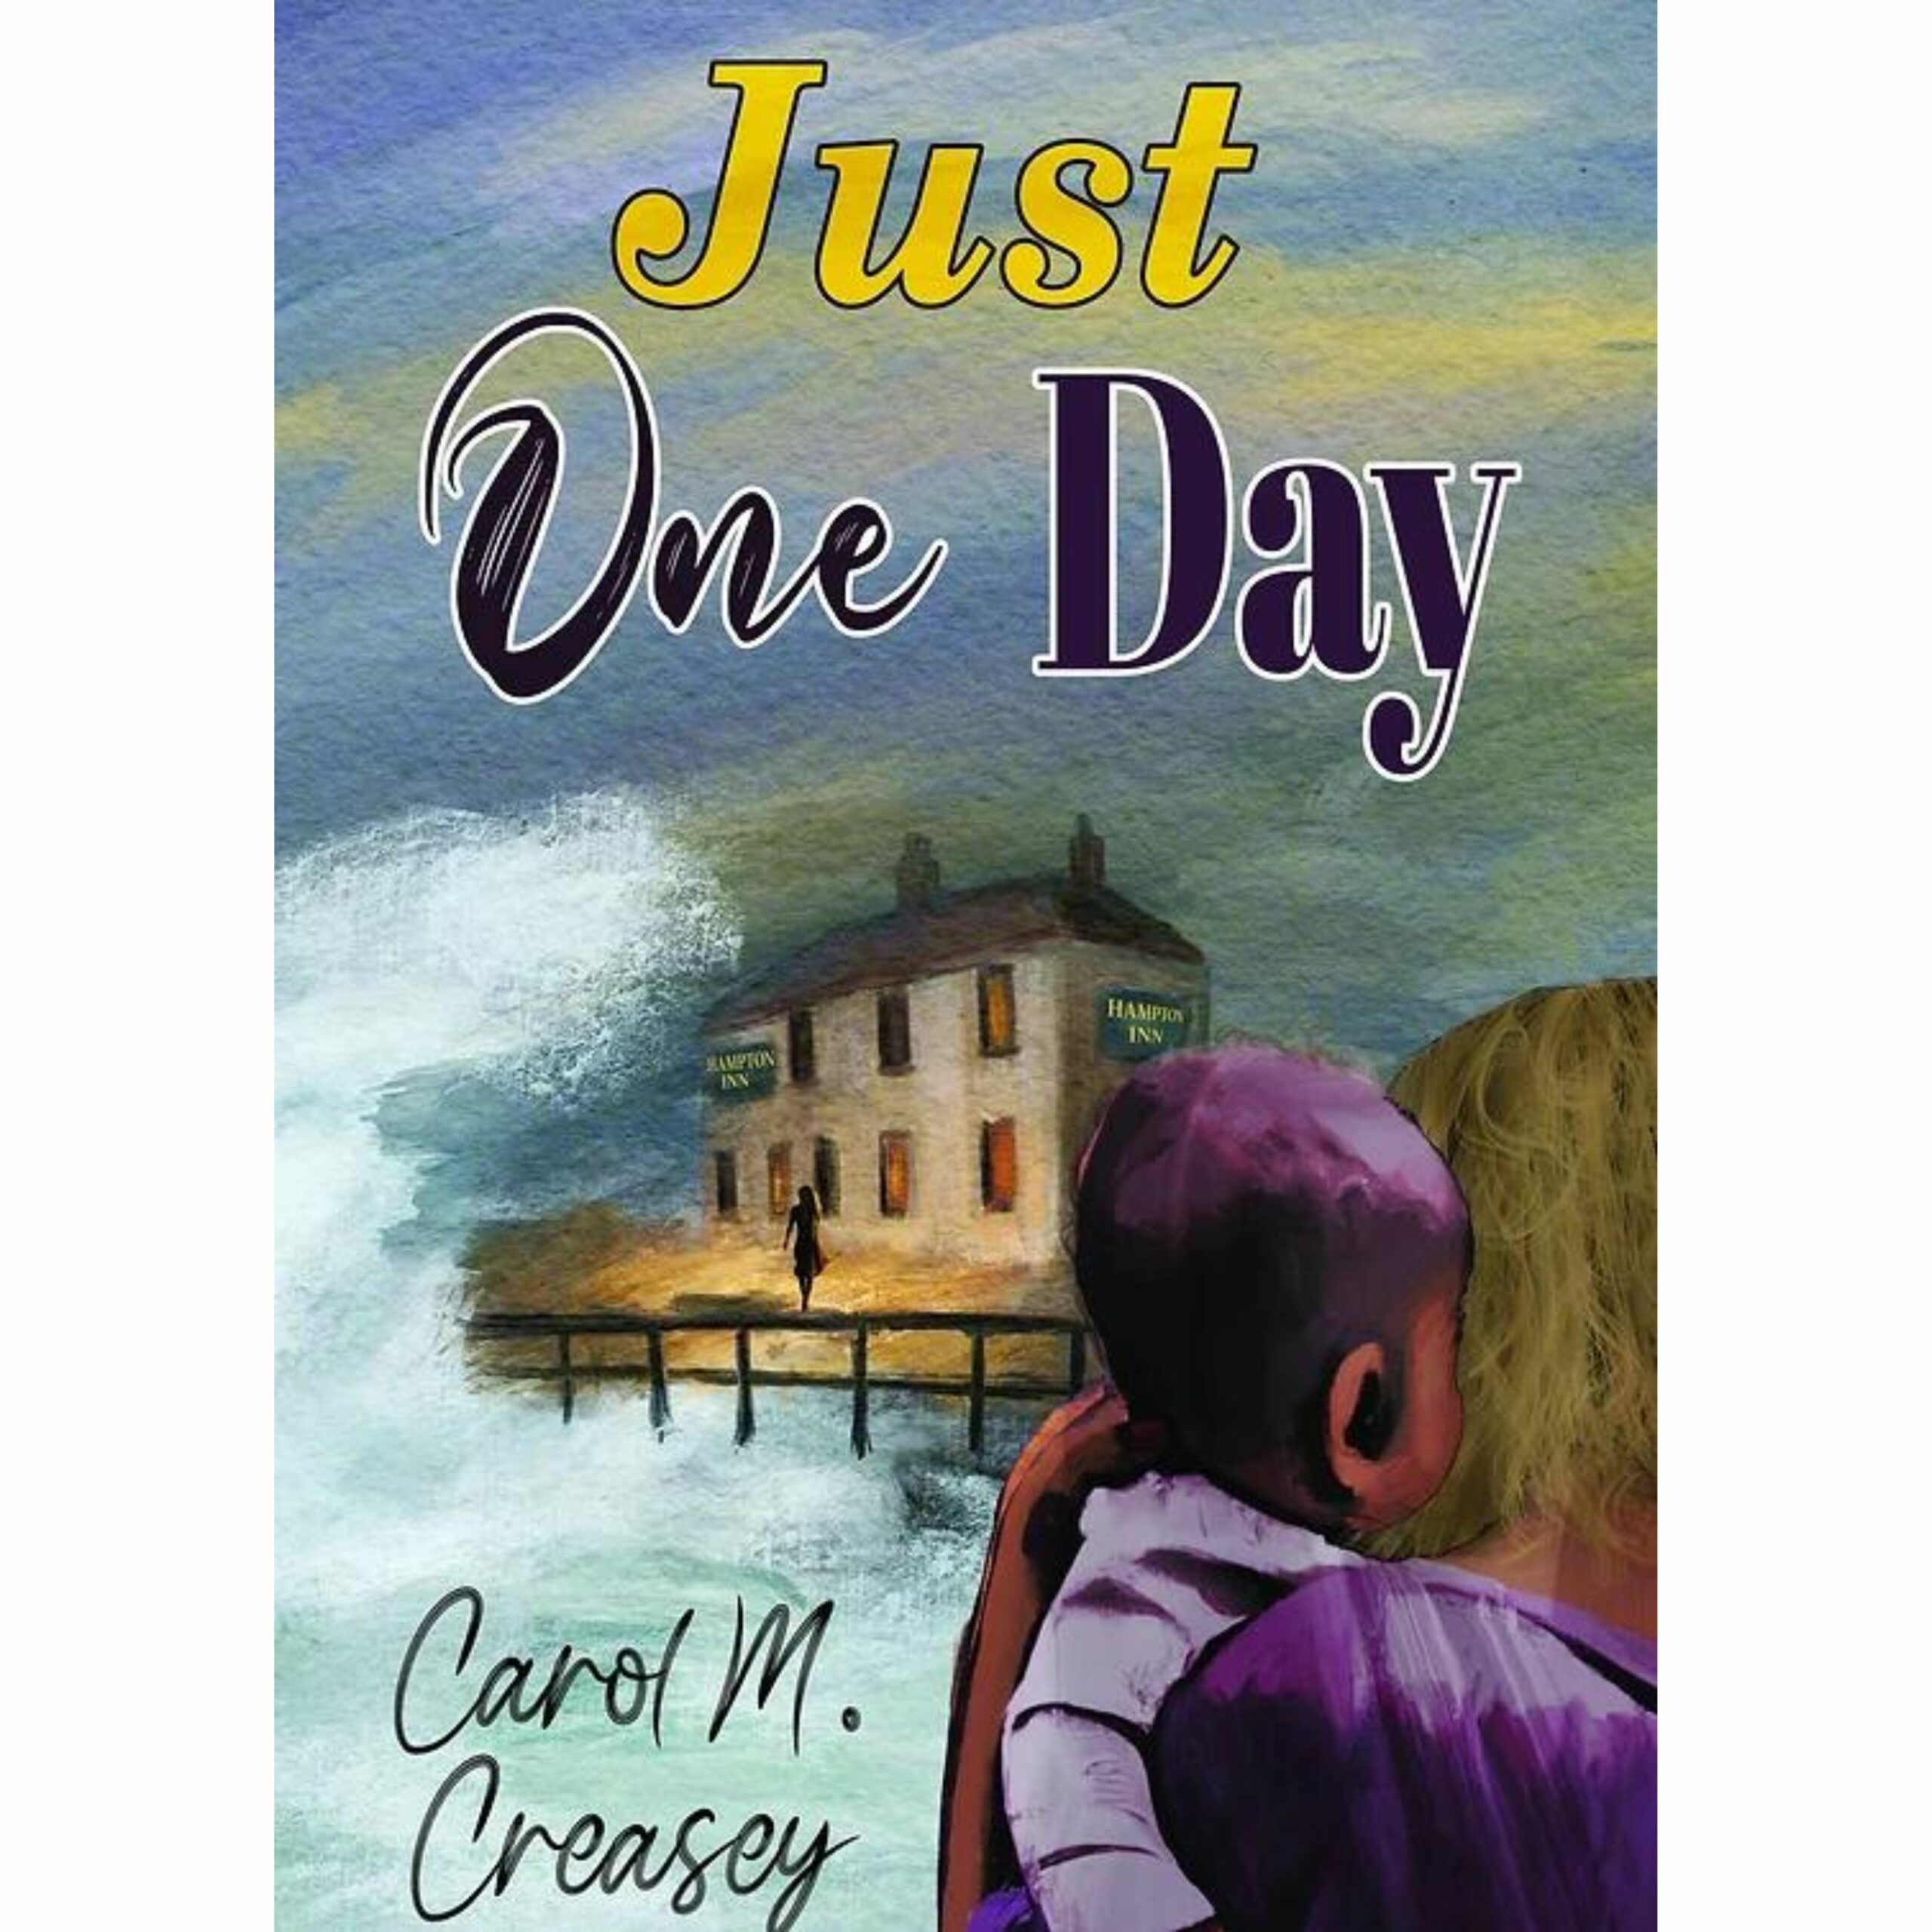 Just One Day - Meet the author Carol M Creasey